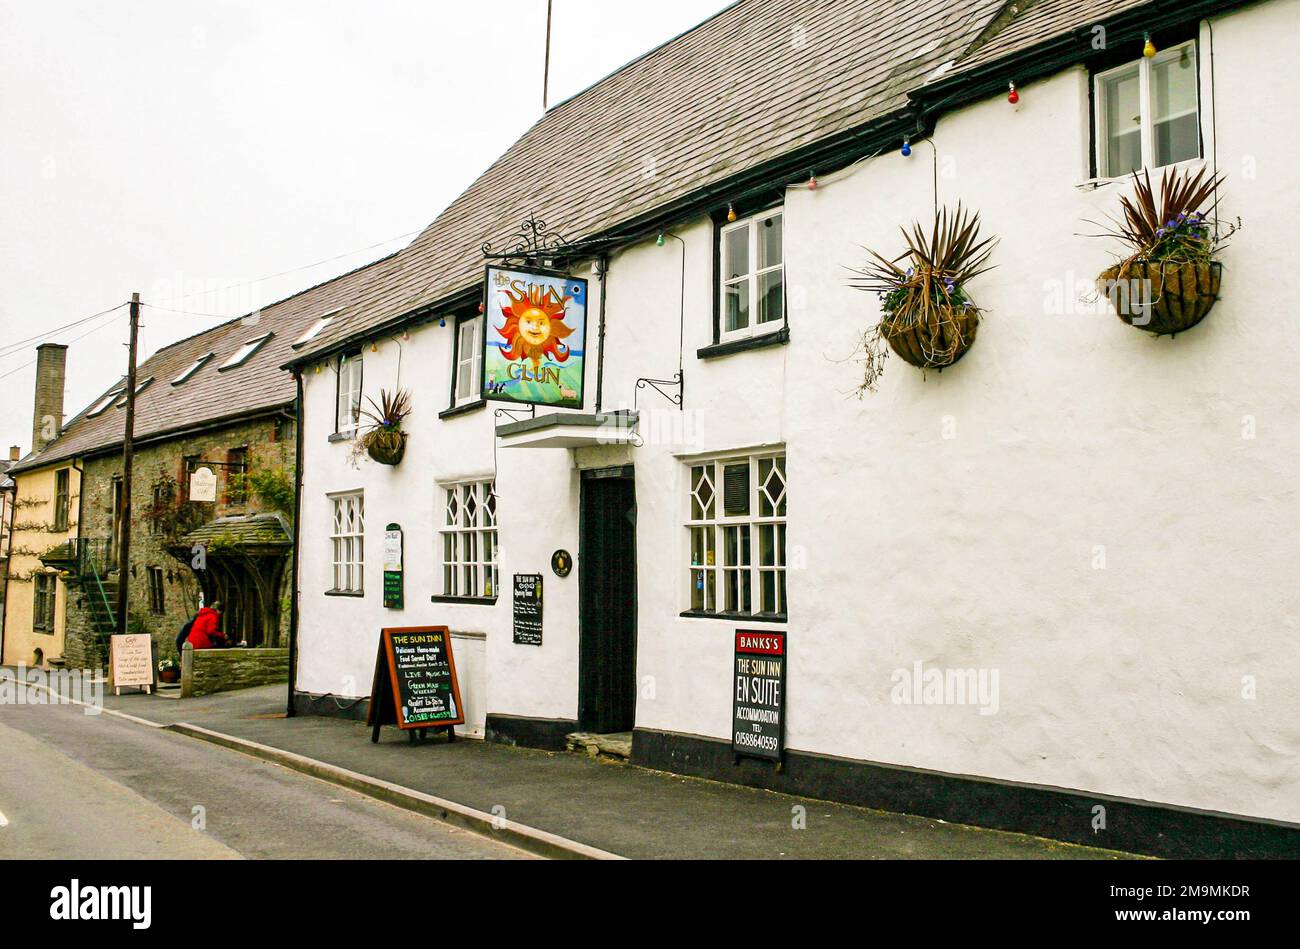 The Sun Inn and pub, Clun, Shropshire, England is a 15th Century building with traditional cruck construction, a grade two listed building. Stock Photo